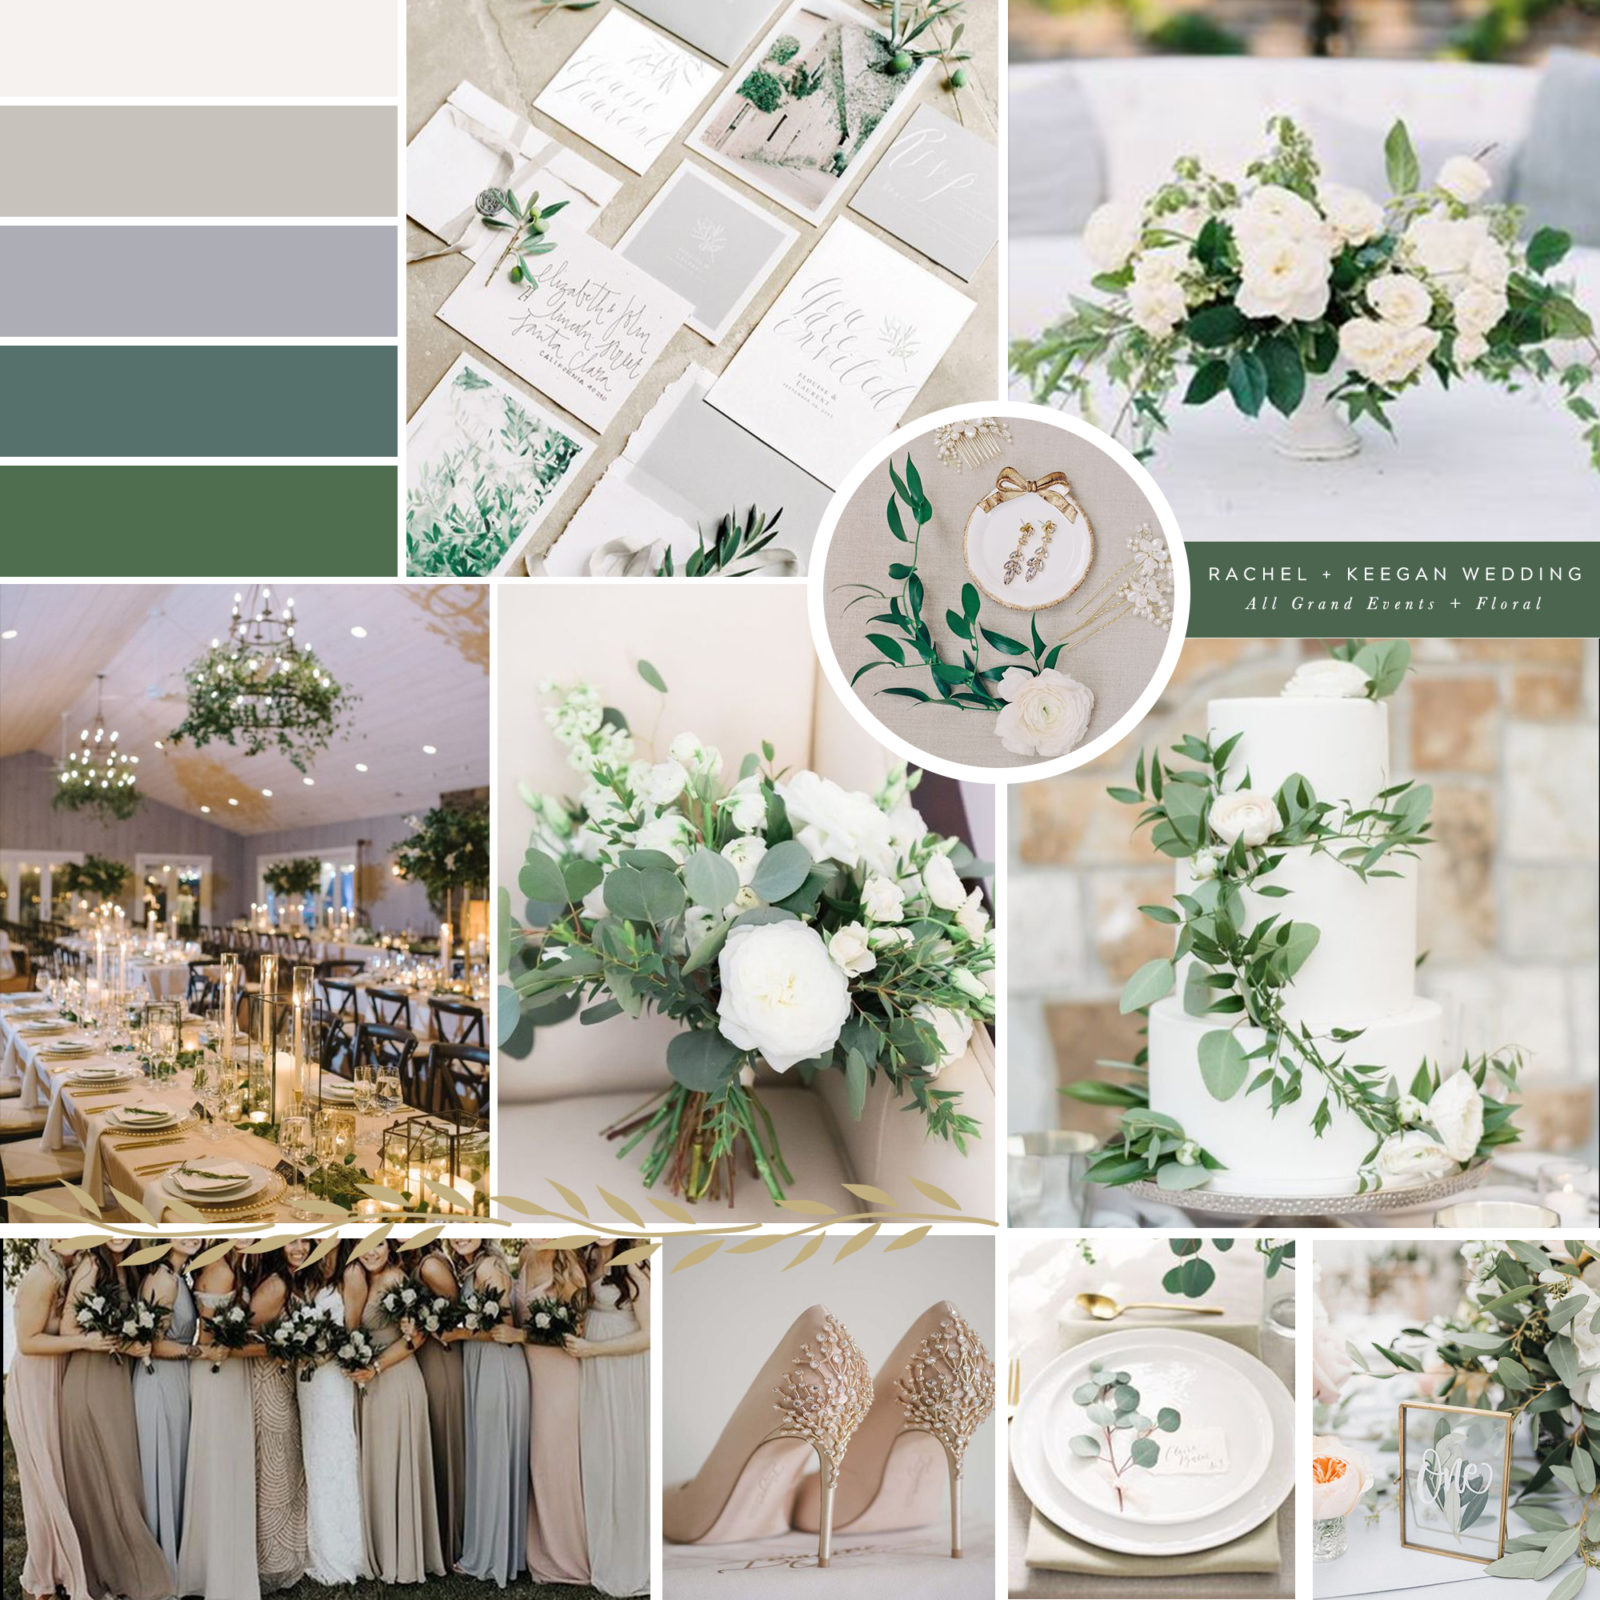 Wedding Industry Lingo | Guide to Help Plan Your Wedding | Part 1 - Floral